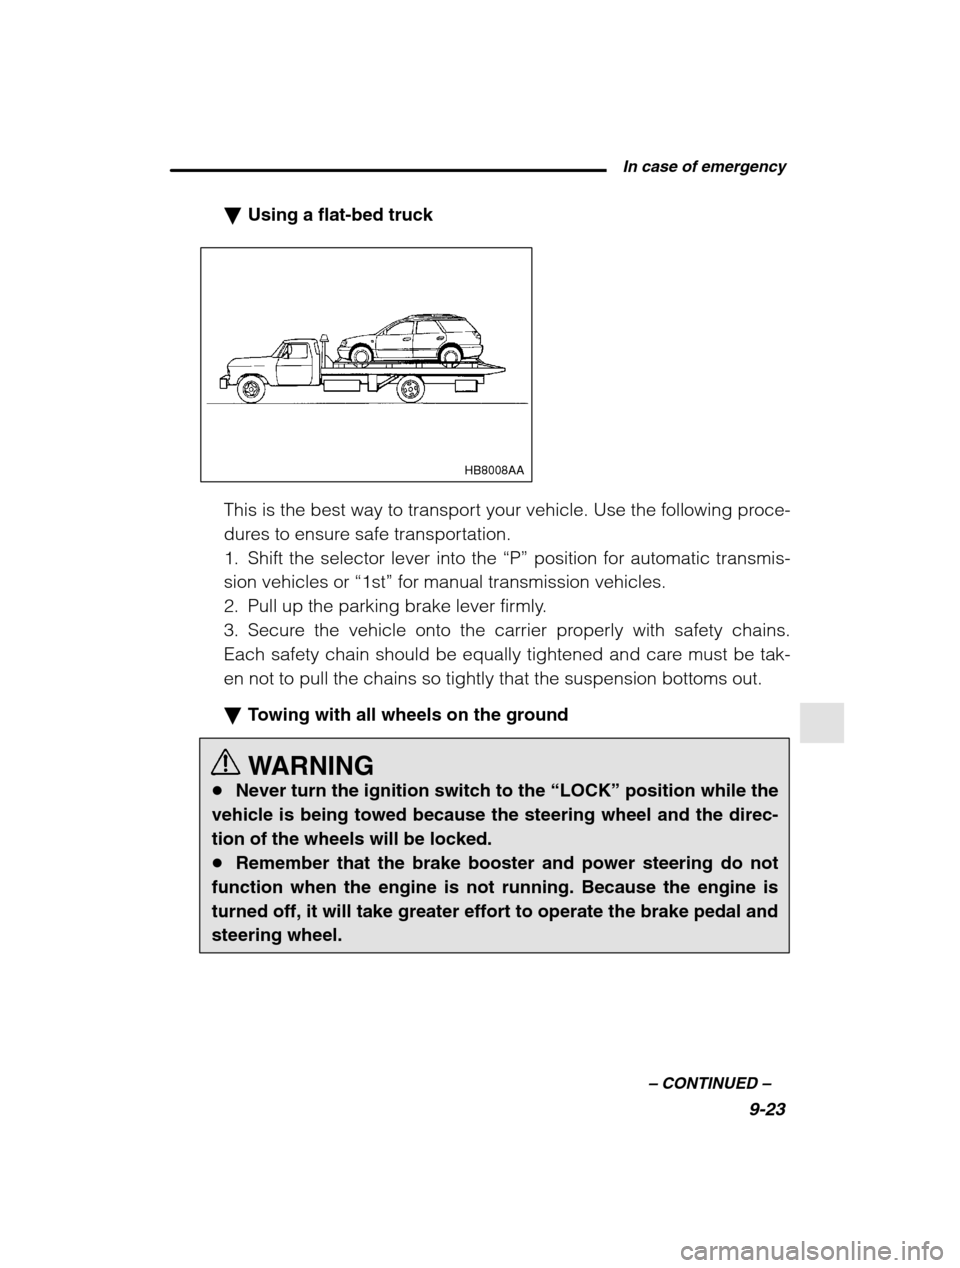 SUBARU LEGACY 2002 3.G Owners Manual  In case of emergency9-23
–
 CONTINUED  –
�Using a flat-bed truck
HB8008AA
This is the best way to transport your vehicle. Use the following proce- 
dures to ensure safe transportation.
1. Shift t